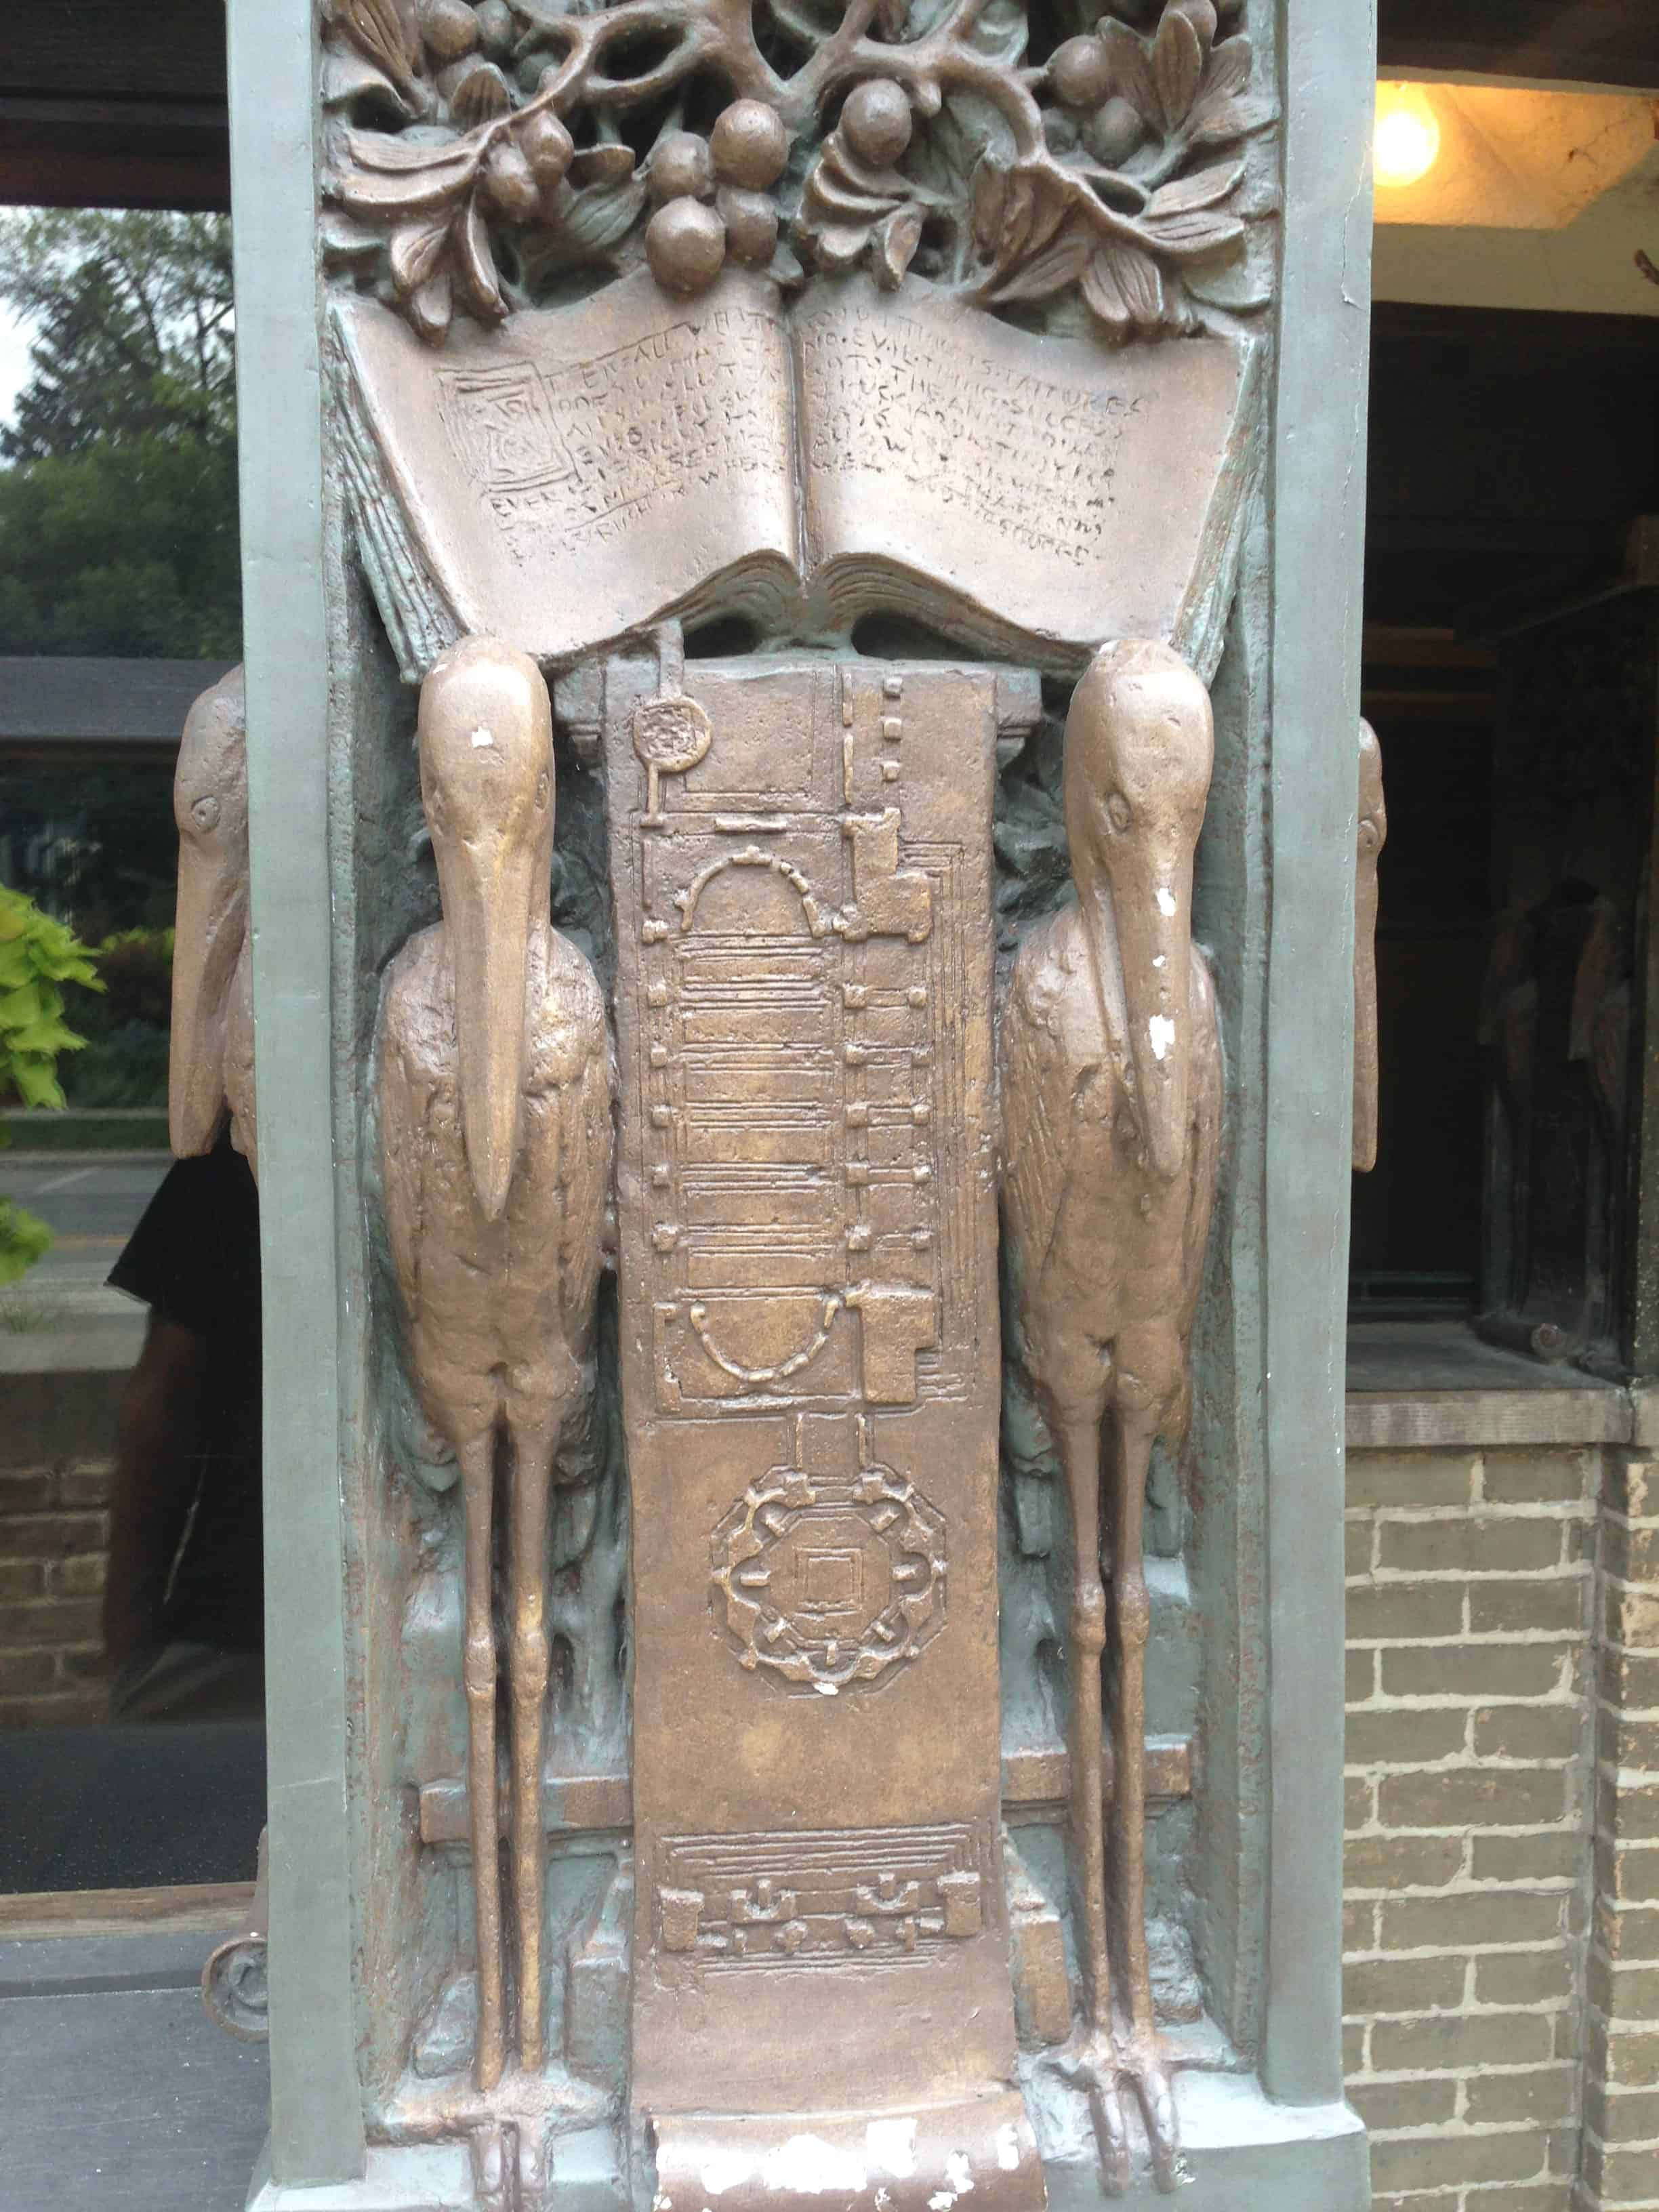 Decoration on the Frank Lloyd Wright Home and Studio